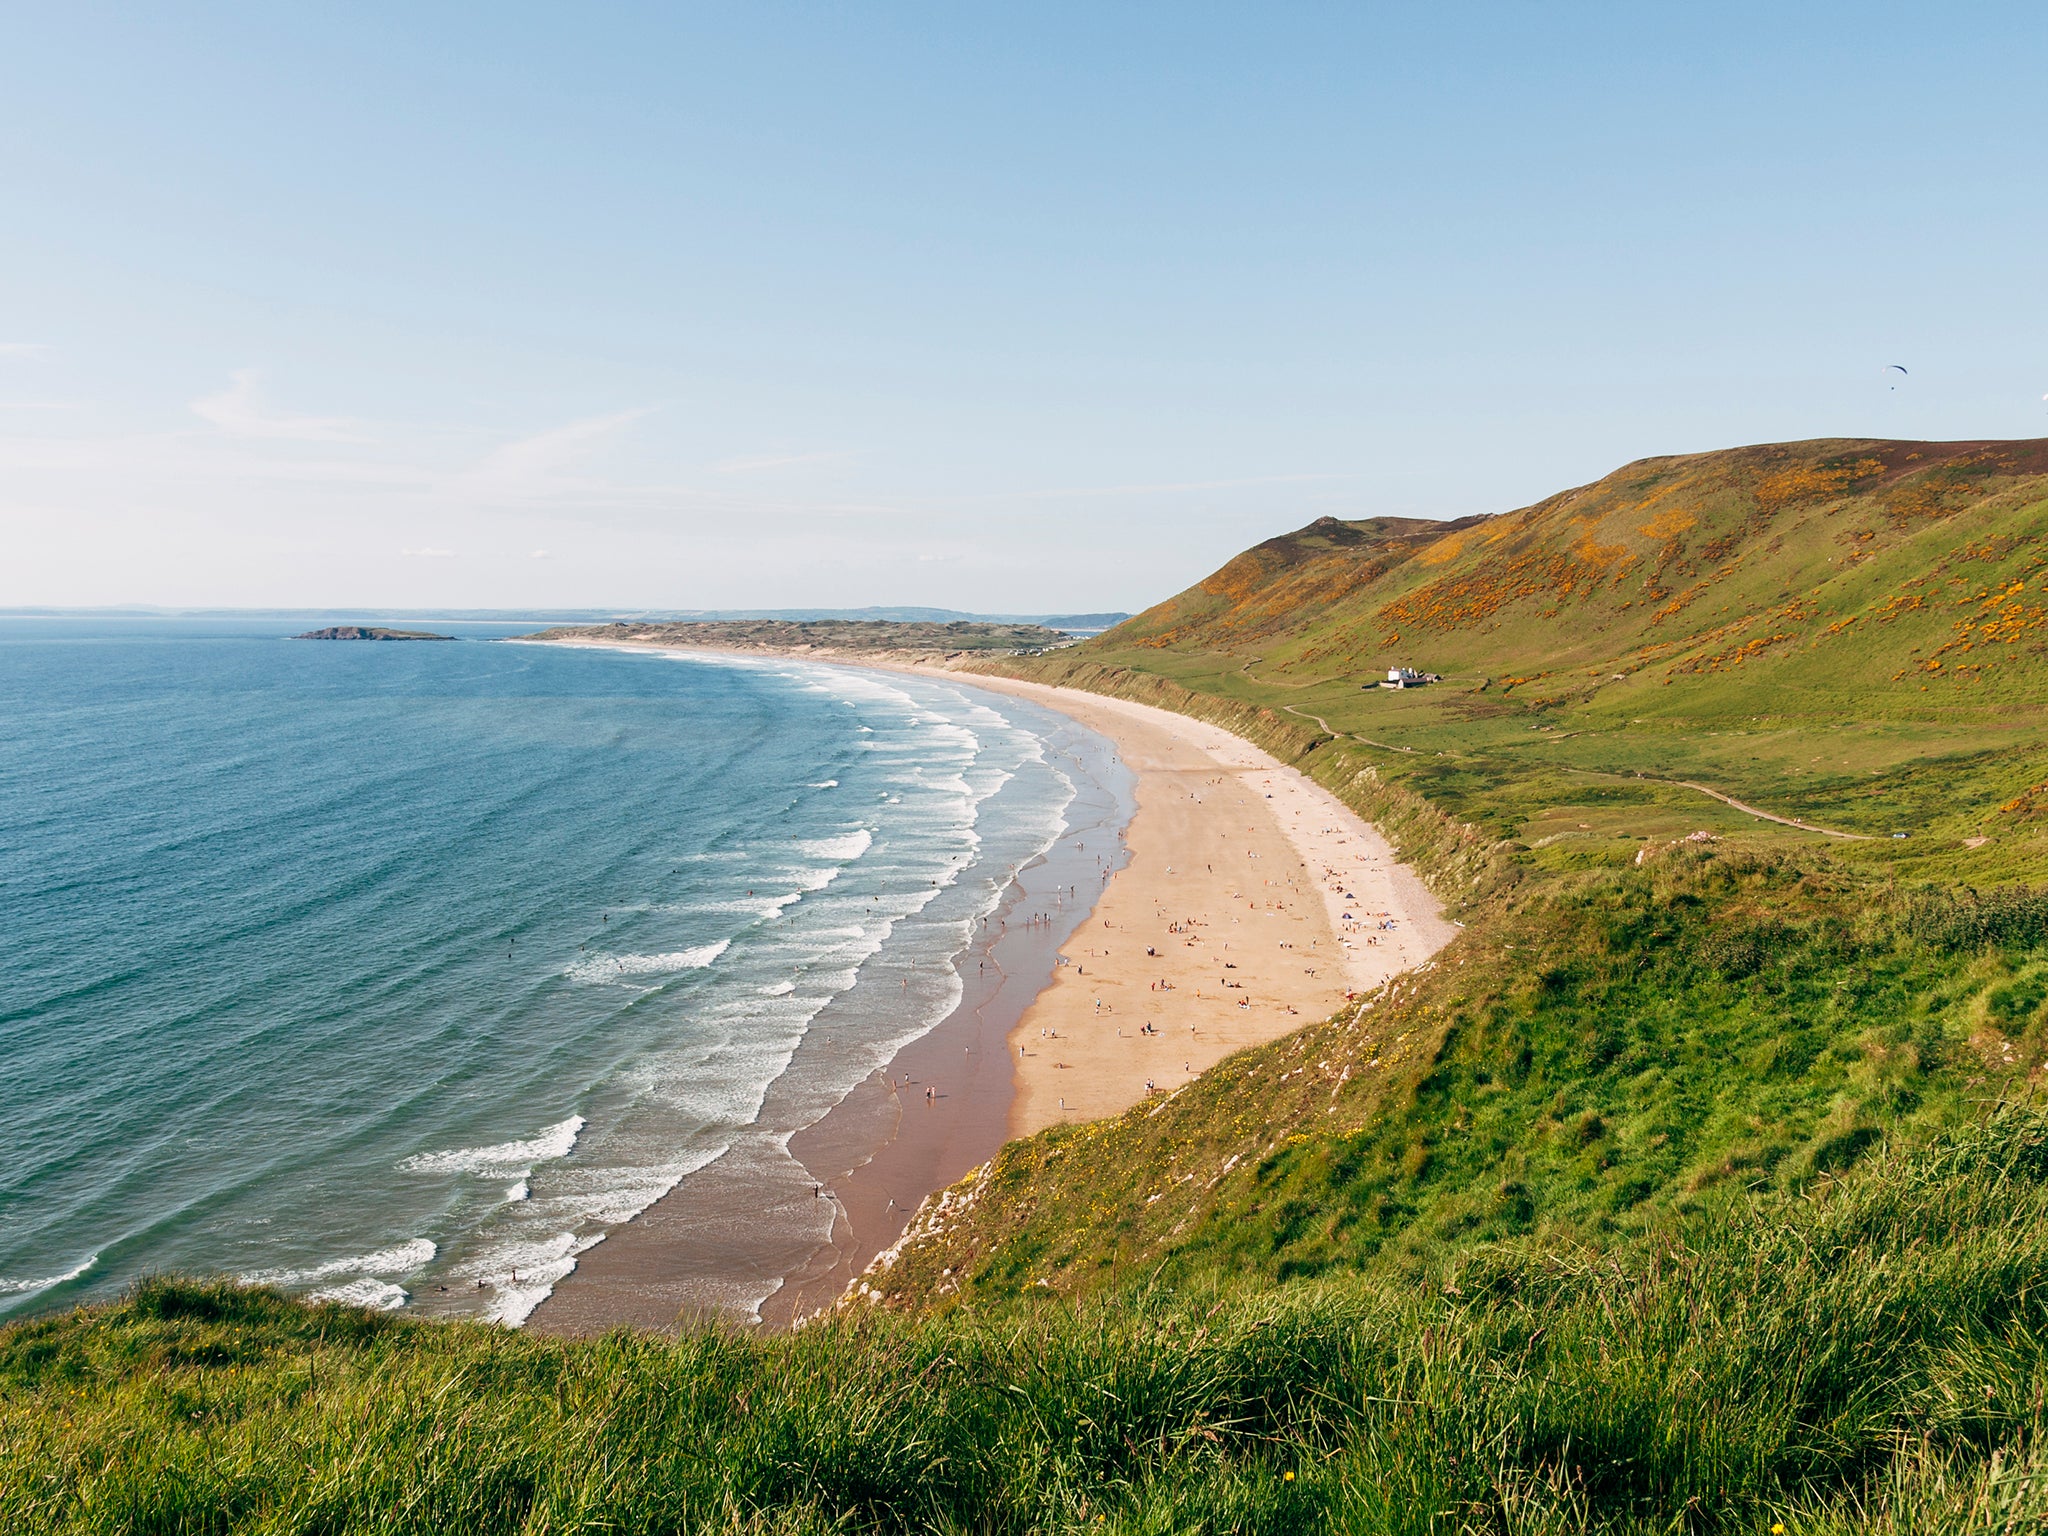 Rhossili Bay is designated as an area of outstanding natural beauty in the United Kingdom